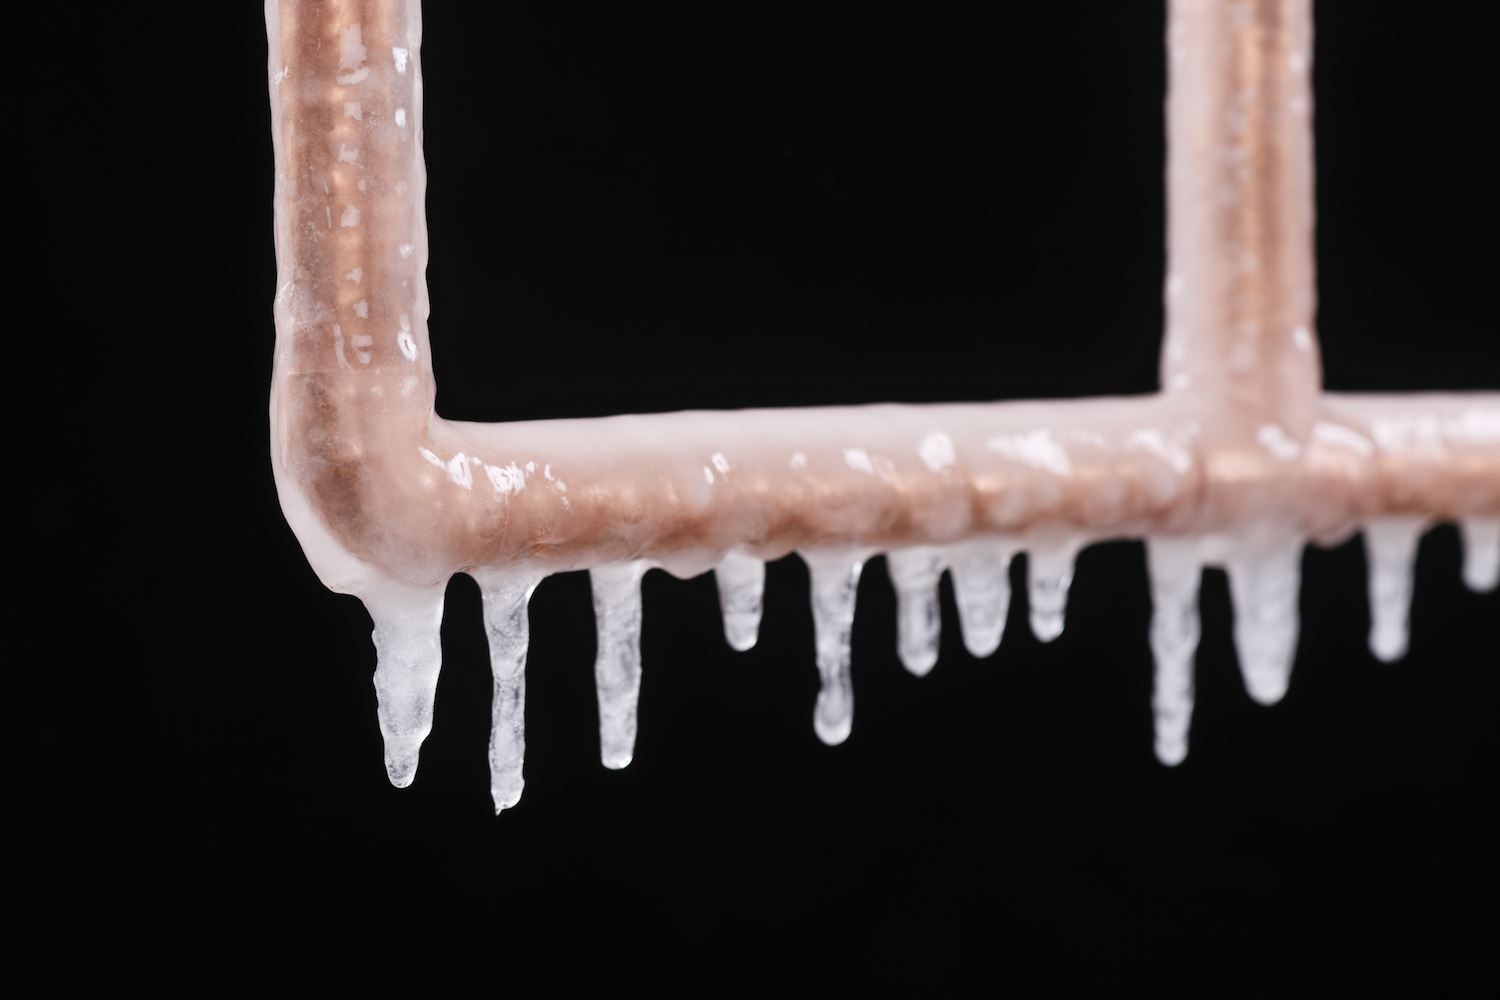 Frozen pipes can cause thousands of pounds of damage.